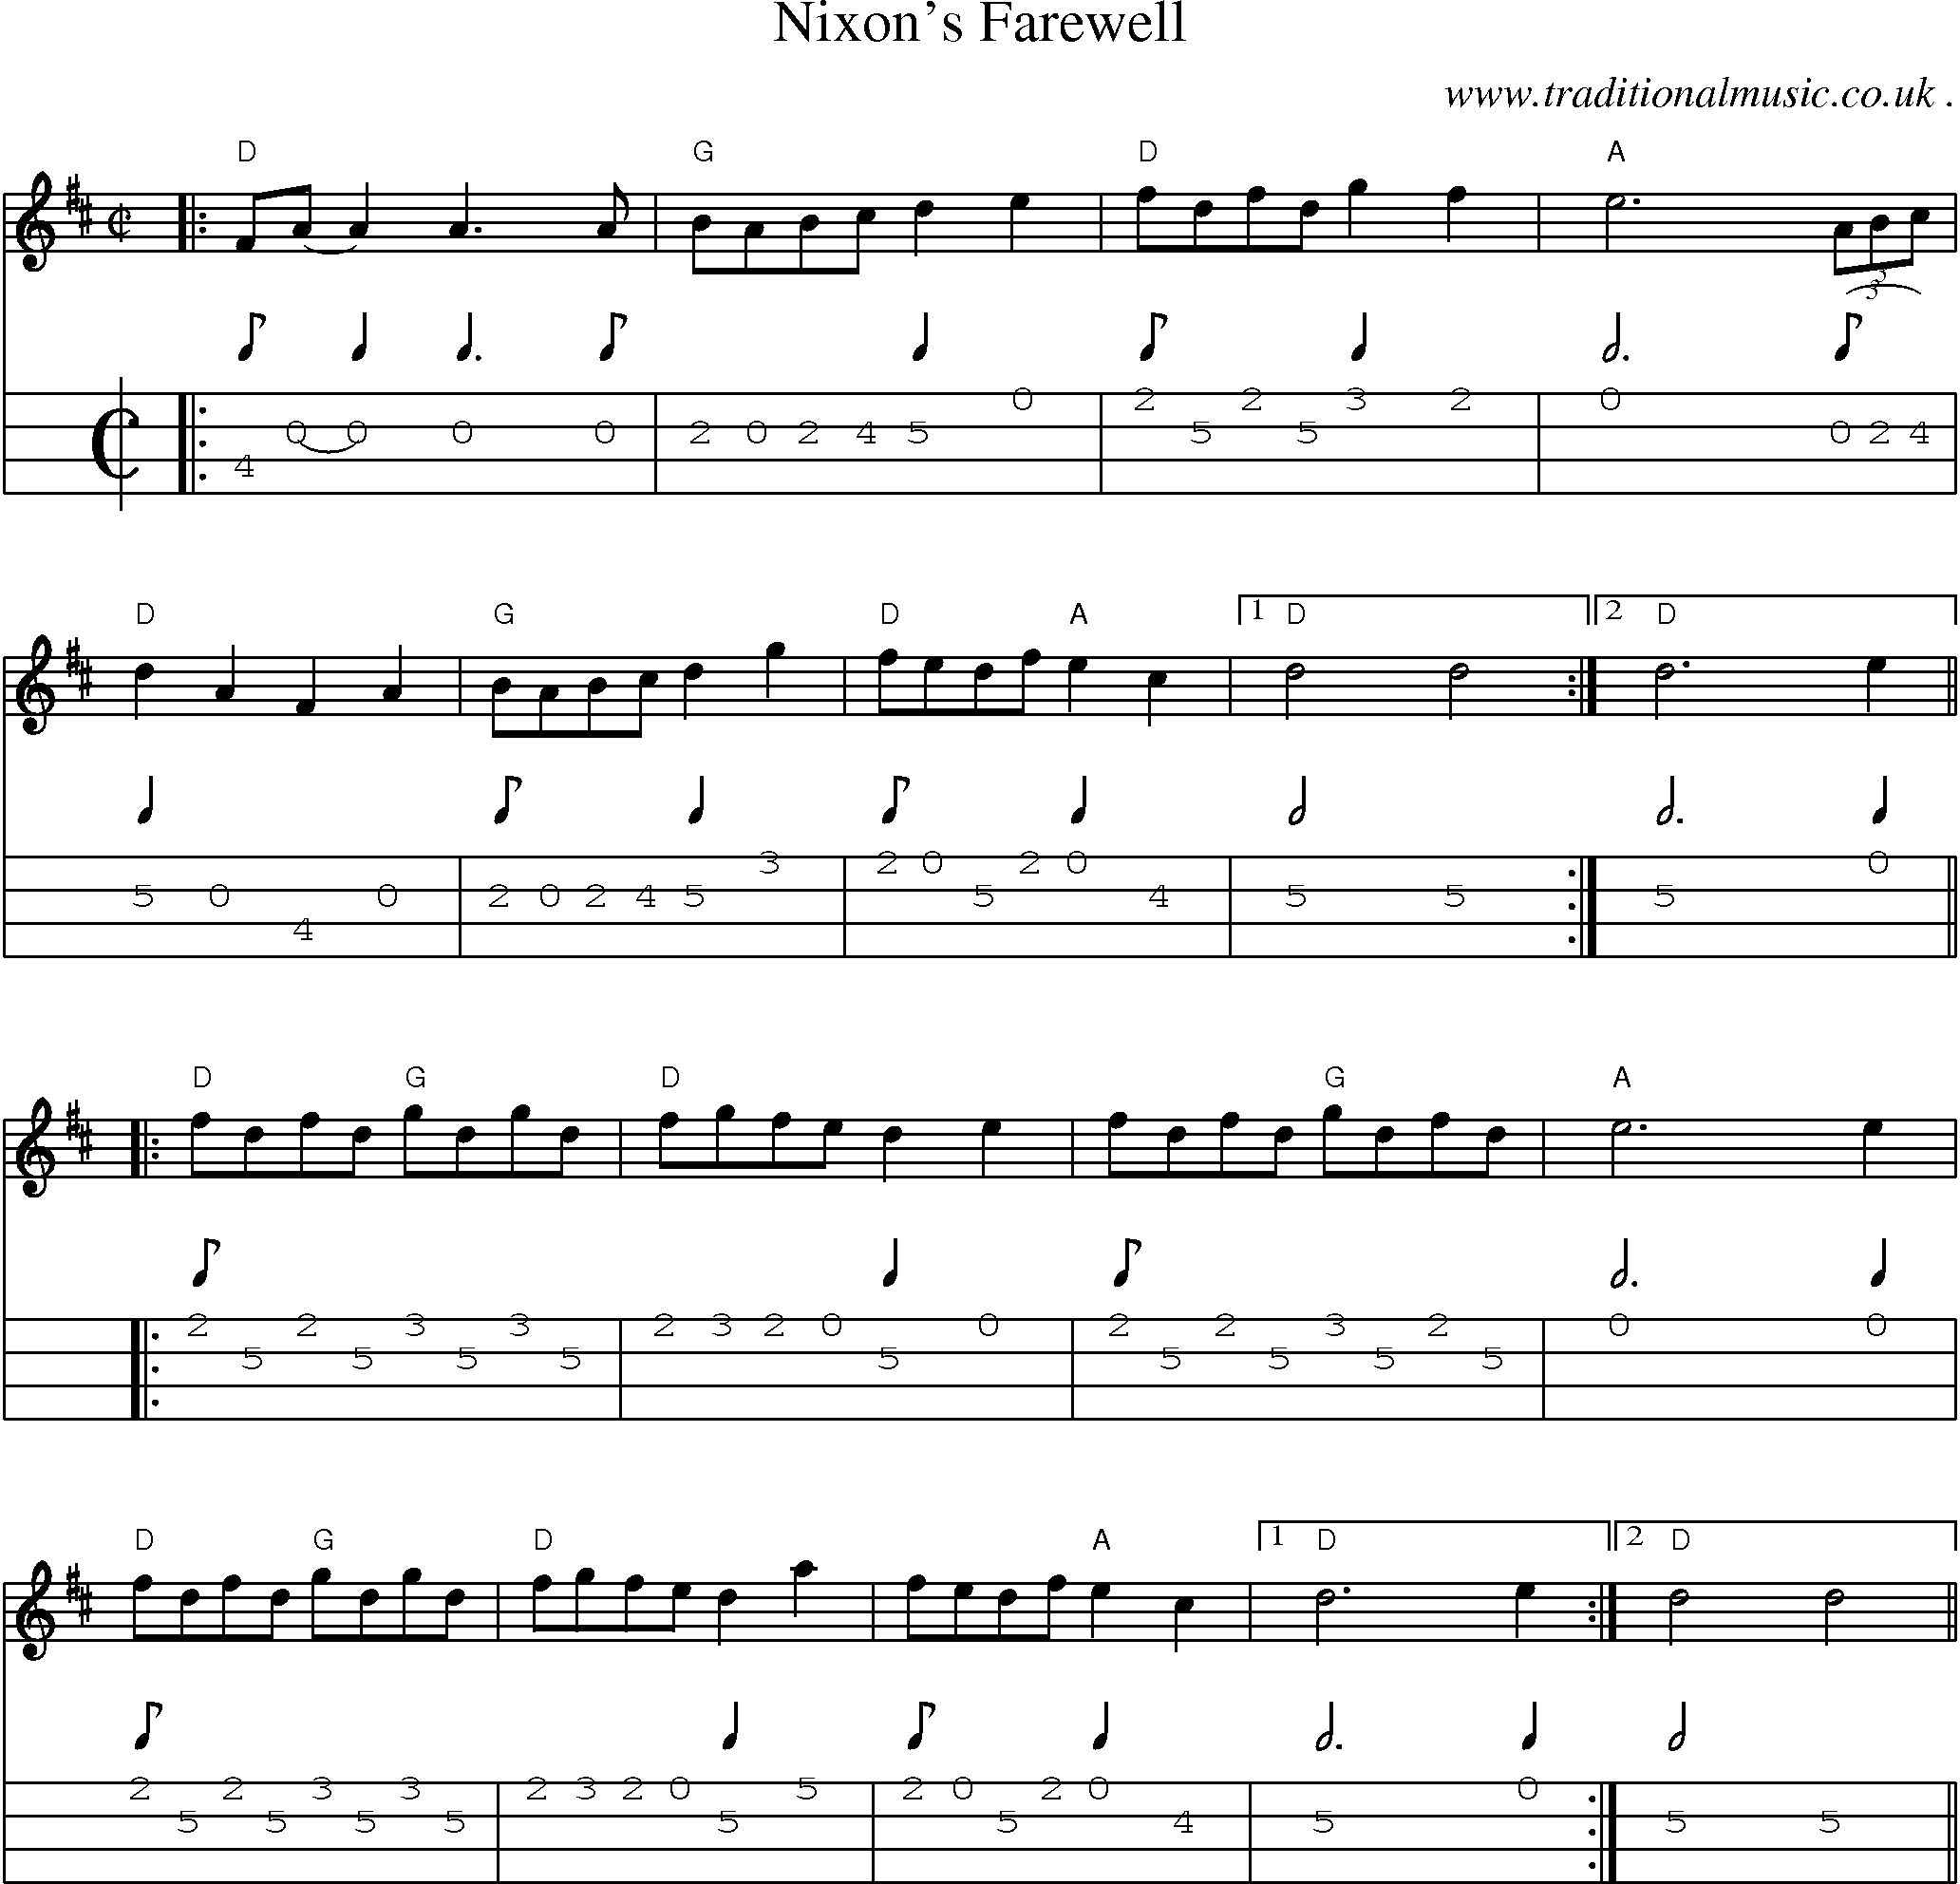 Music Score and Mandolin Tabs for Nixons Farewell